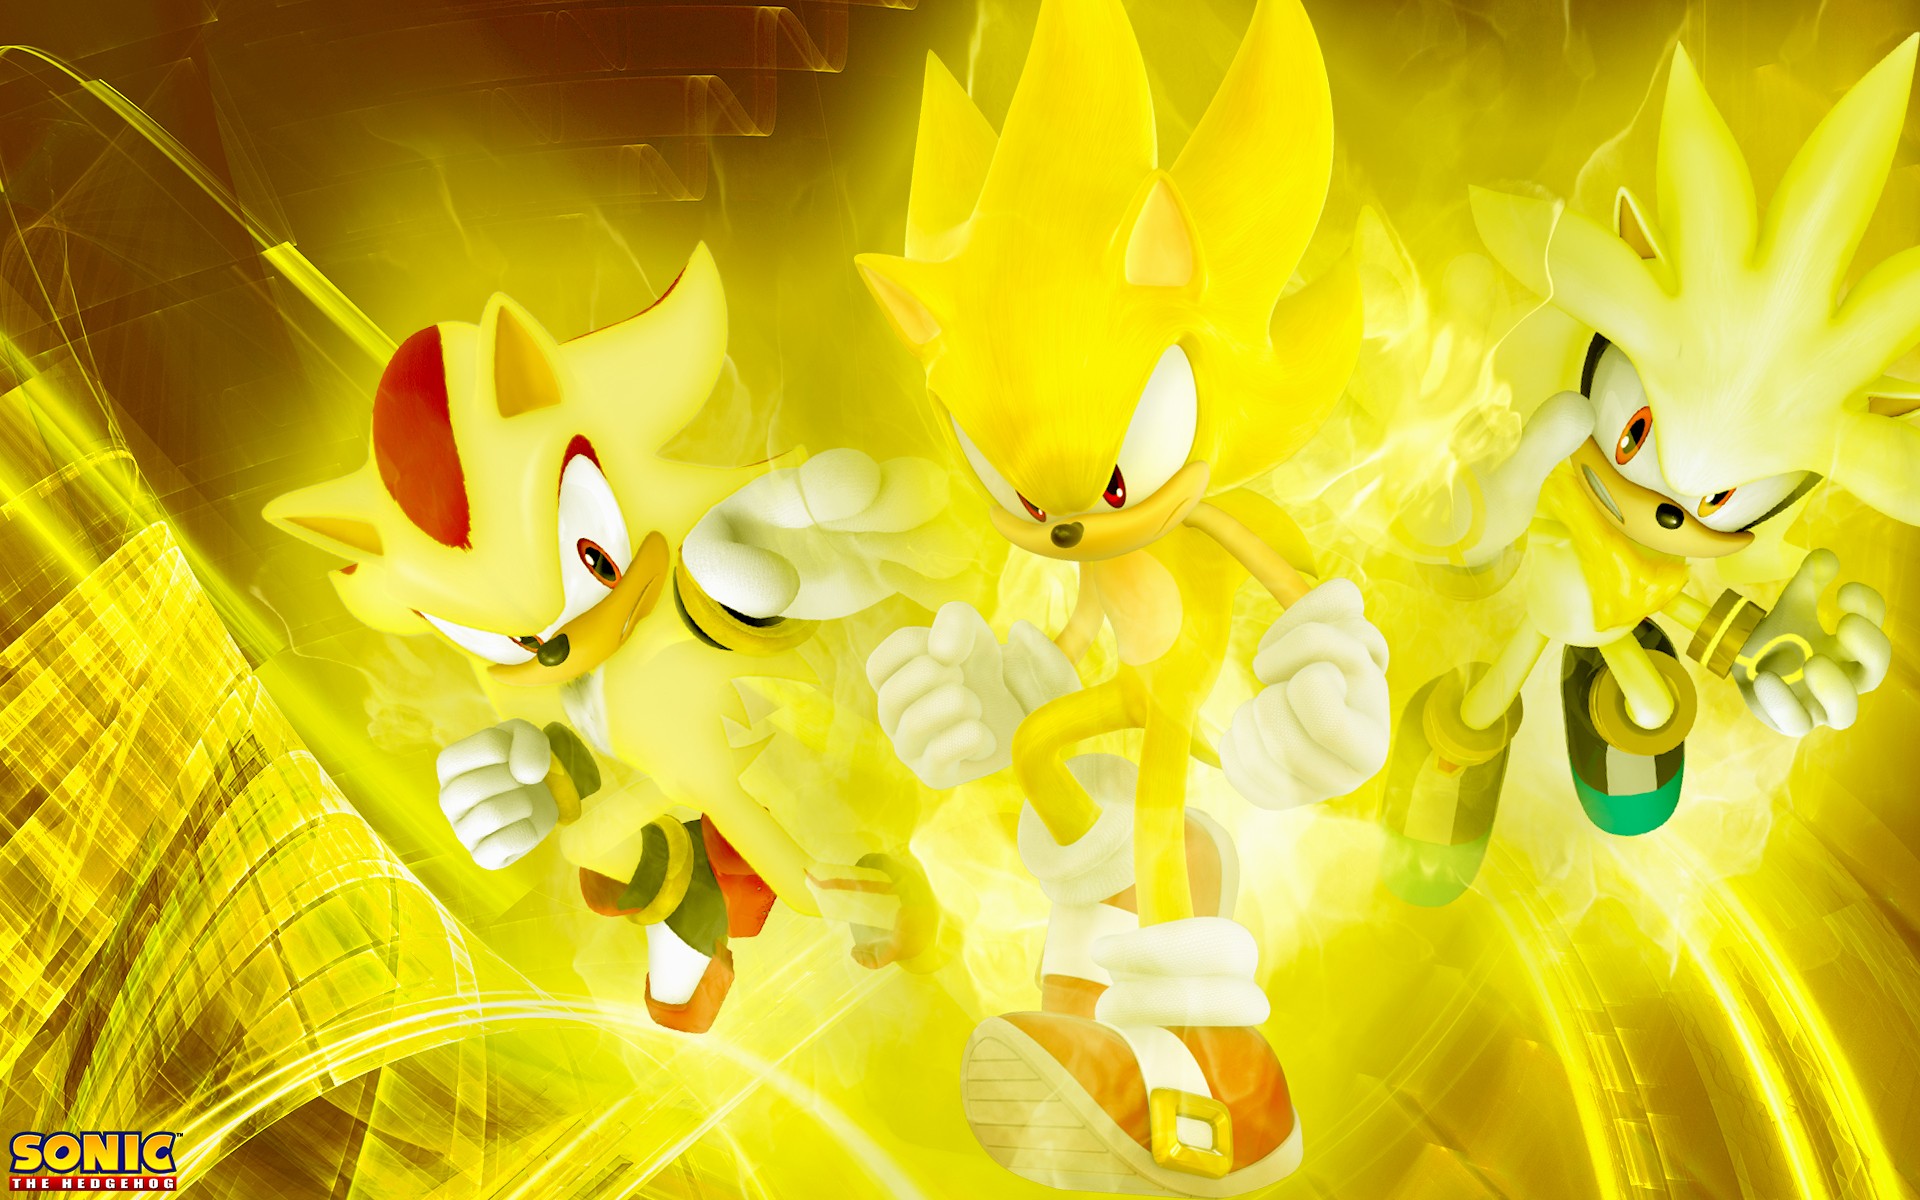 750+ Sonic HD Wallpapers and Backgrounds